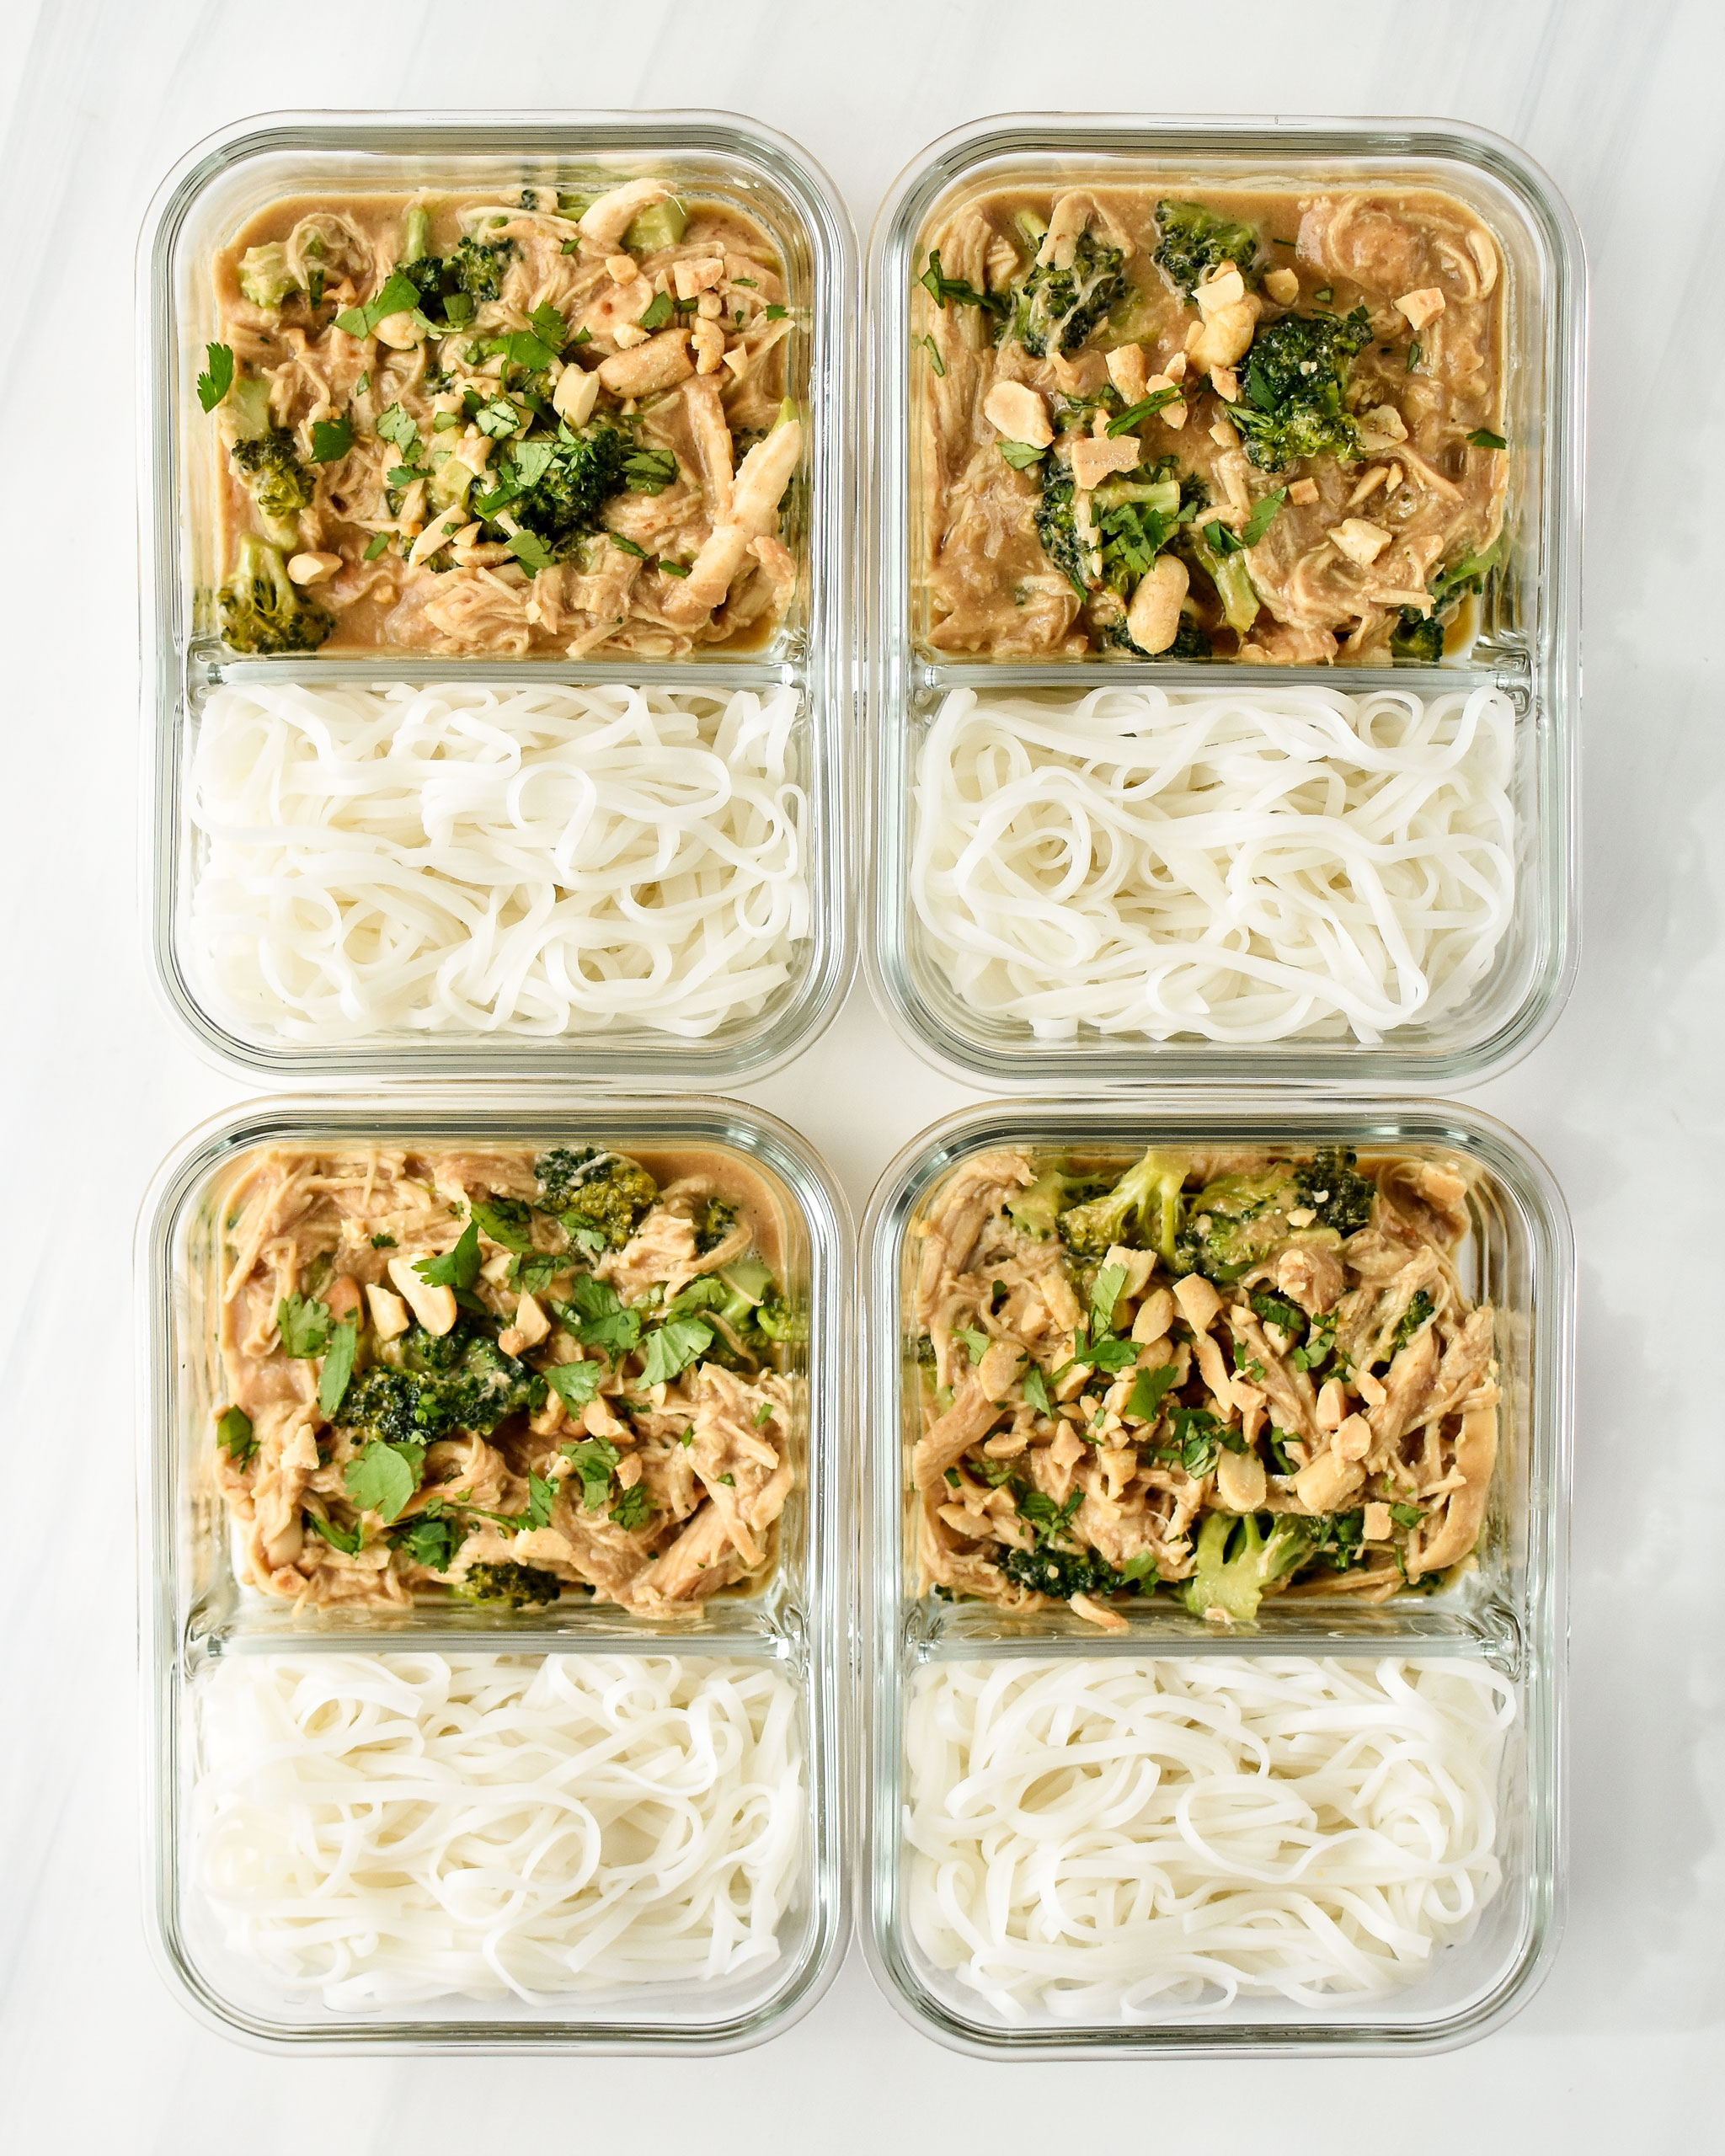 slow cooker peanut chicken noodle meal prep pictured in glass meal prep containers